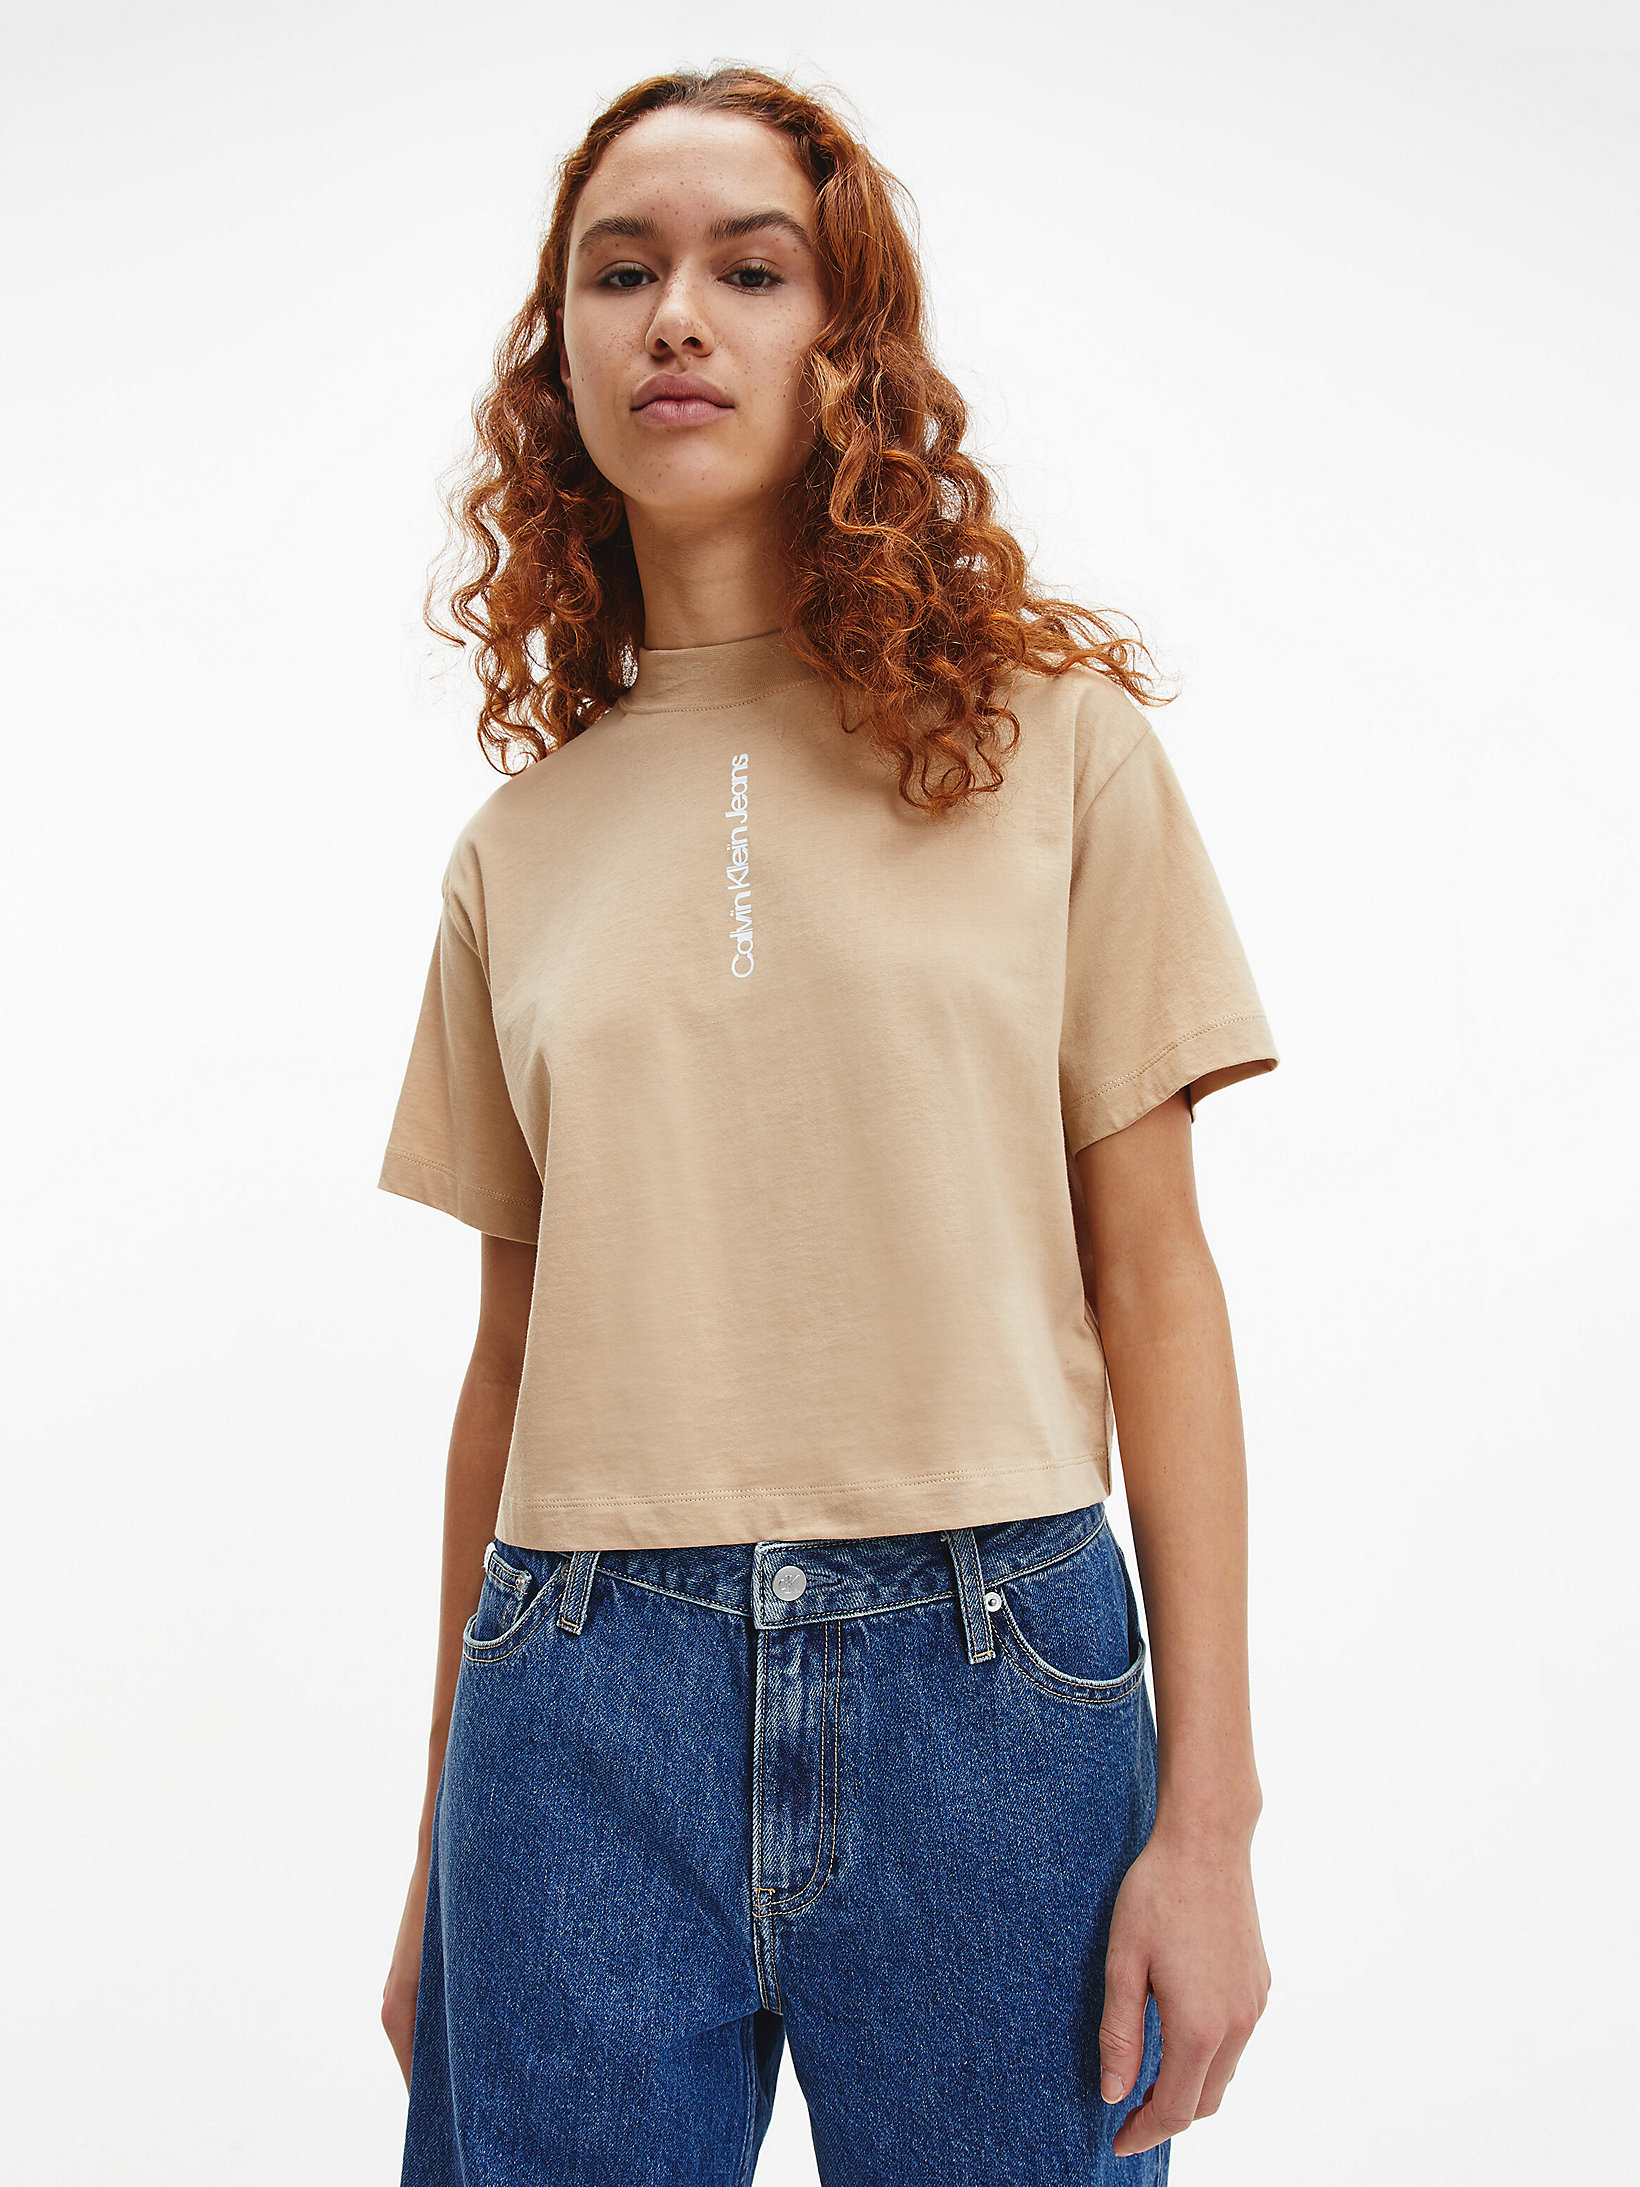 T-Shirt Con Logo In Cotone Biologico Taglio Relaxed > Tawny Sand > undefined donna > Calvin Klein